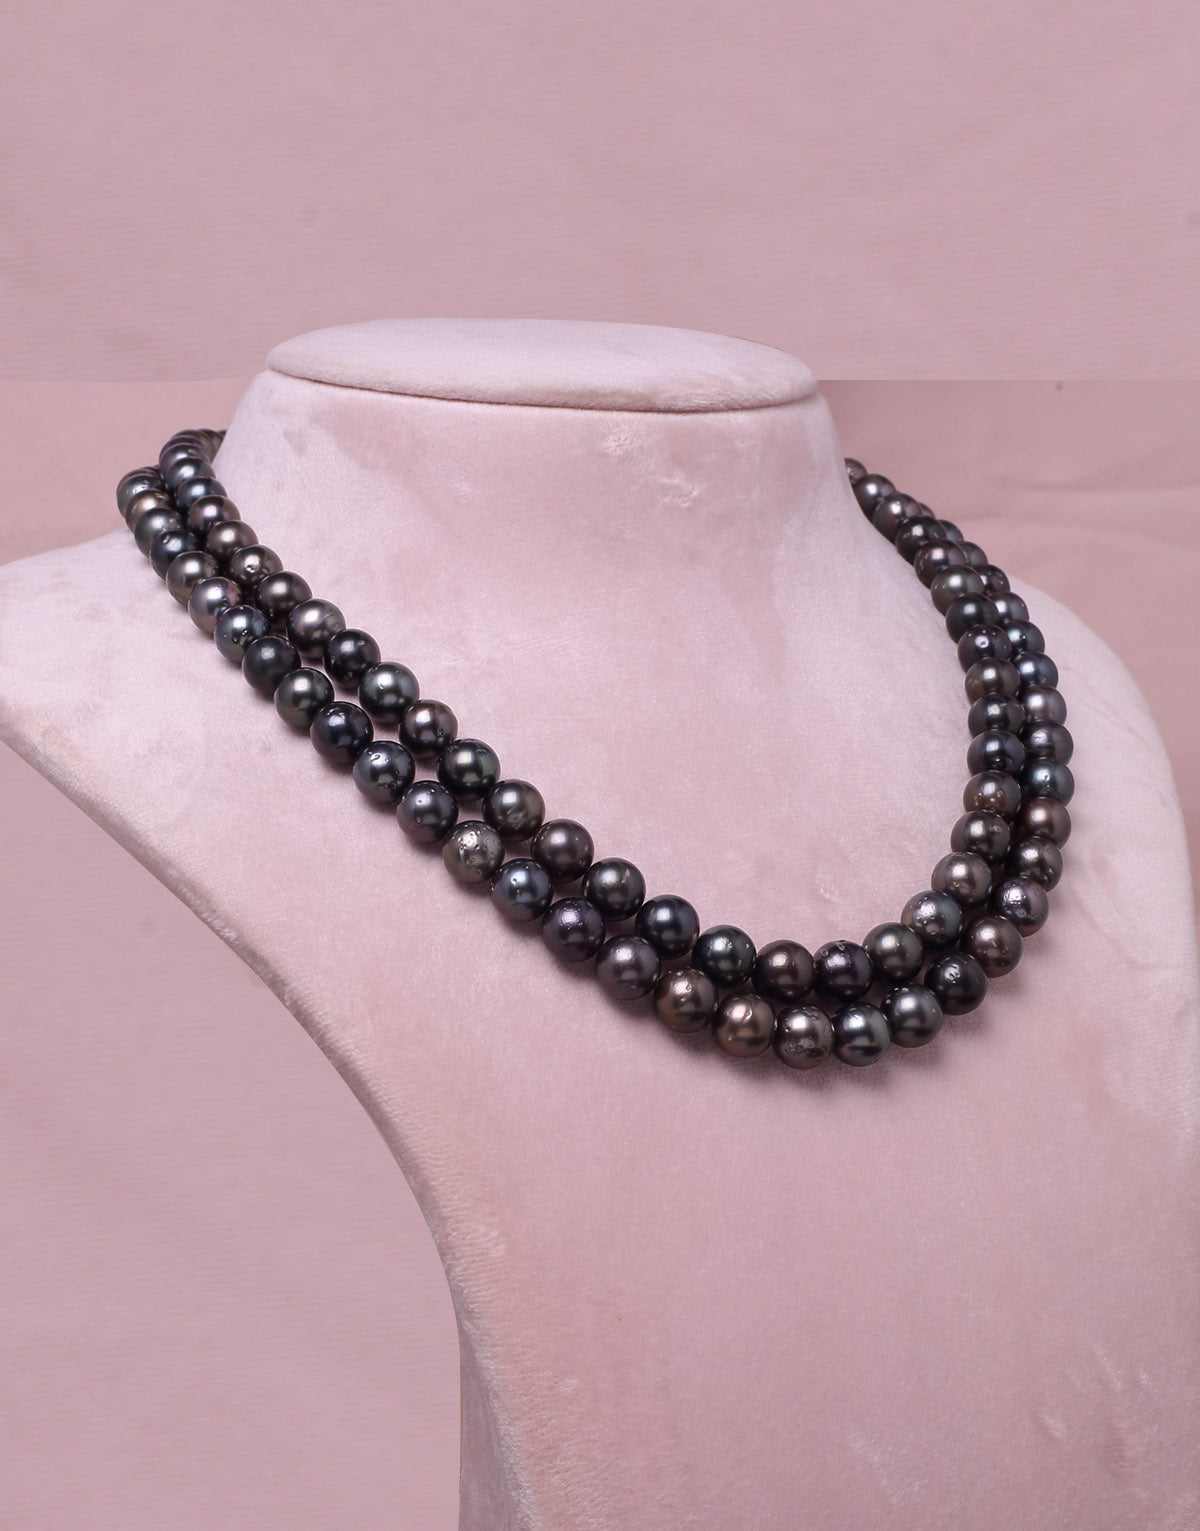 Round Natural-Color Black Tahitian Saltwater Pearl Necklace, 7.5-9.8mm – A Quality